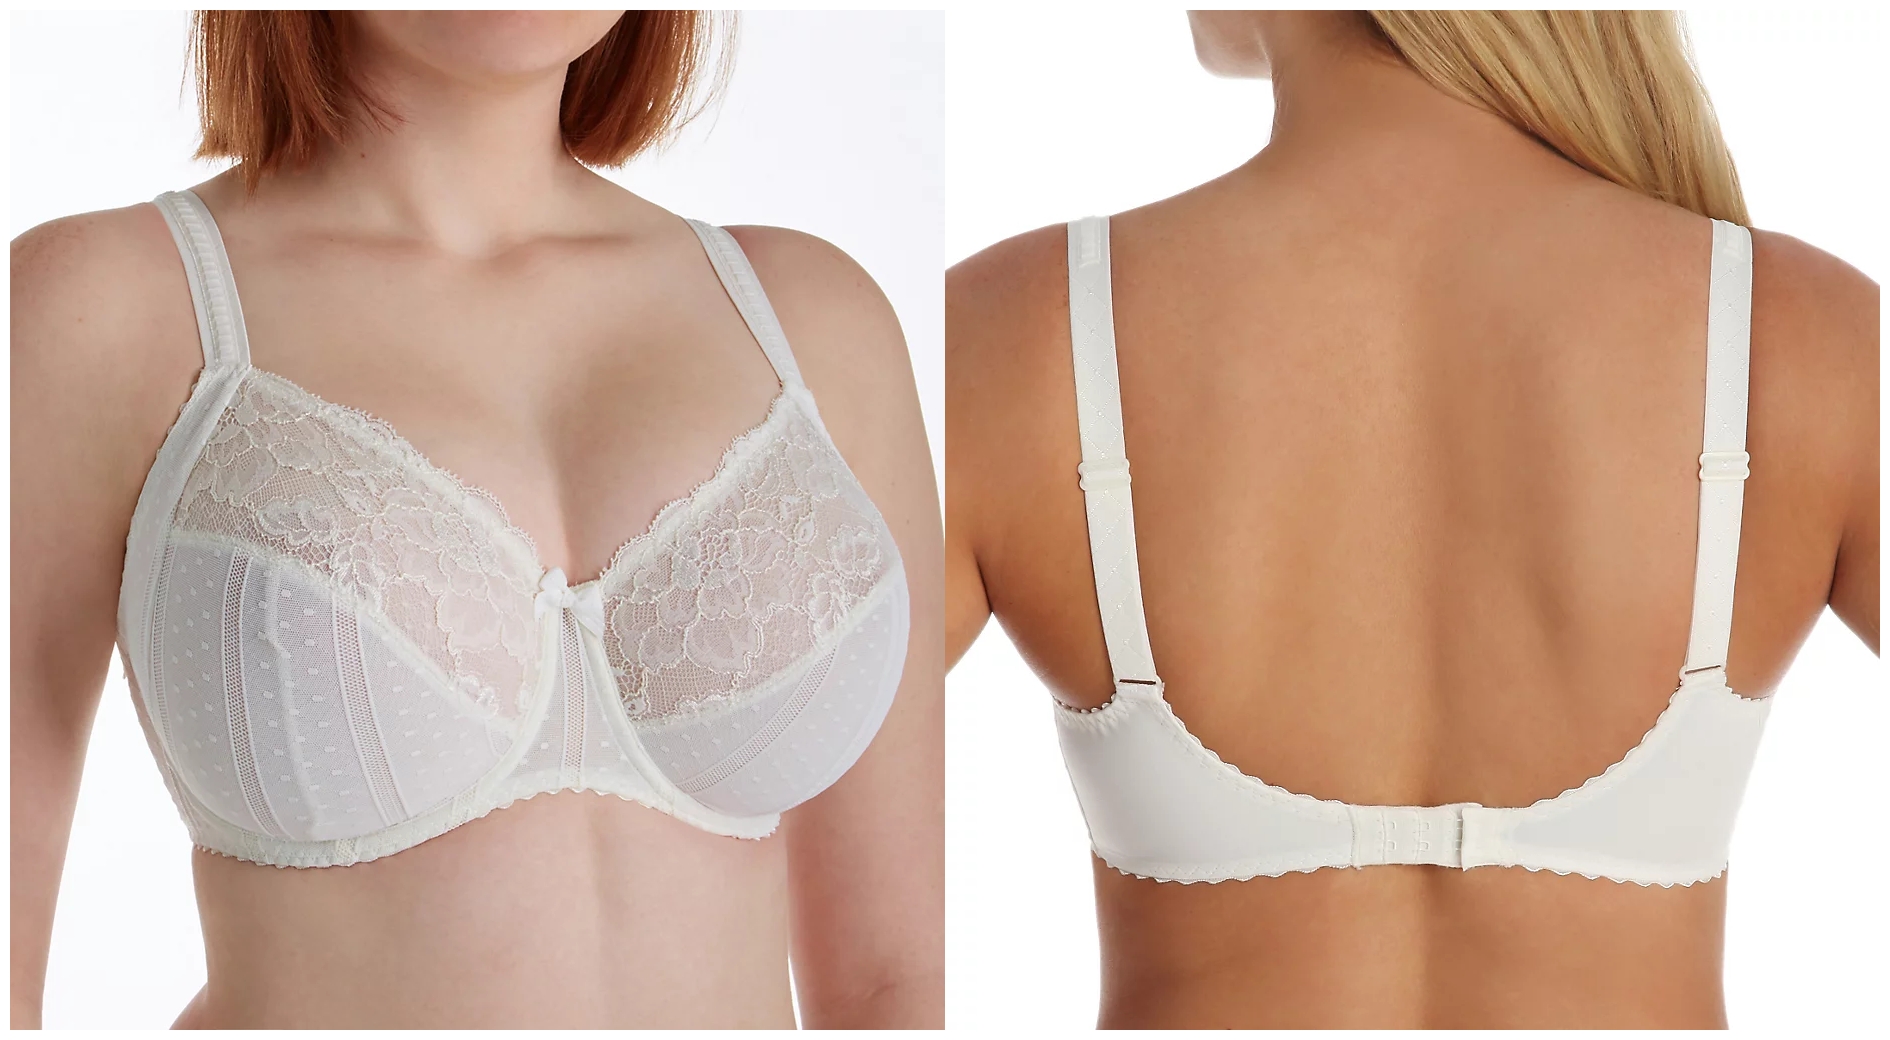 Wedding undergarments with lace and pretty detailing can also be worn on your honeymoon.